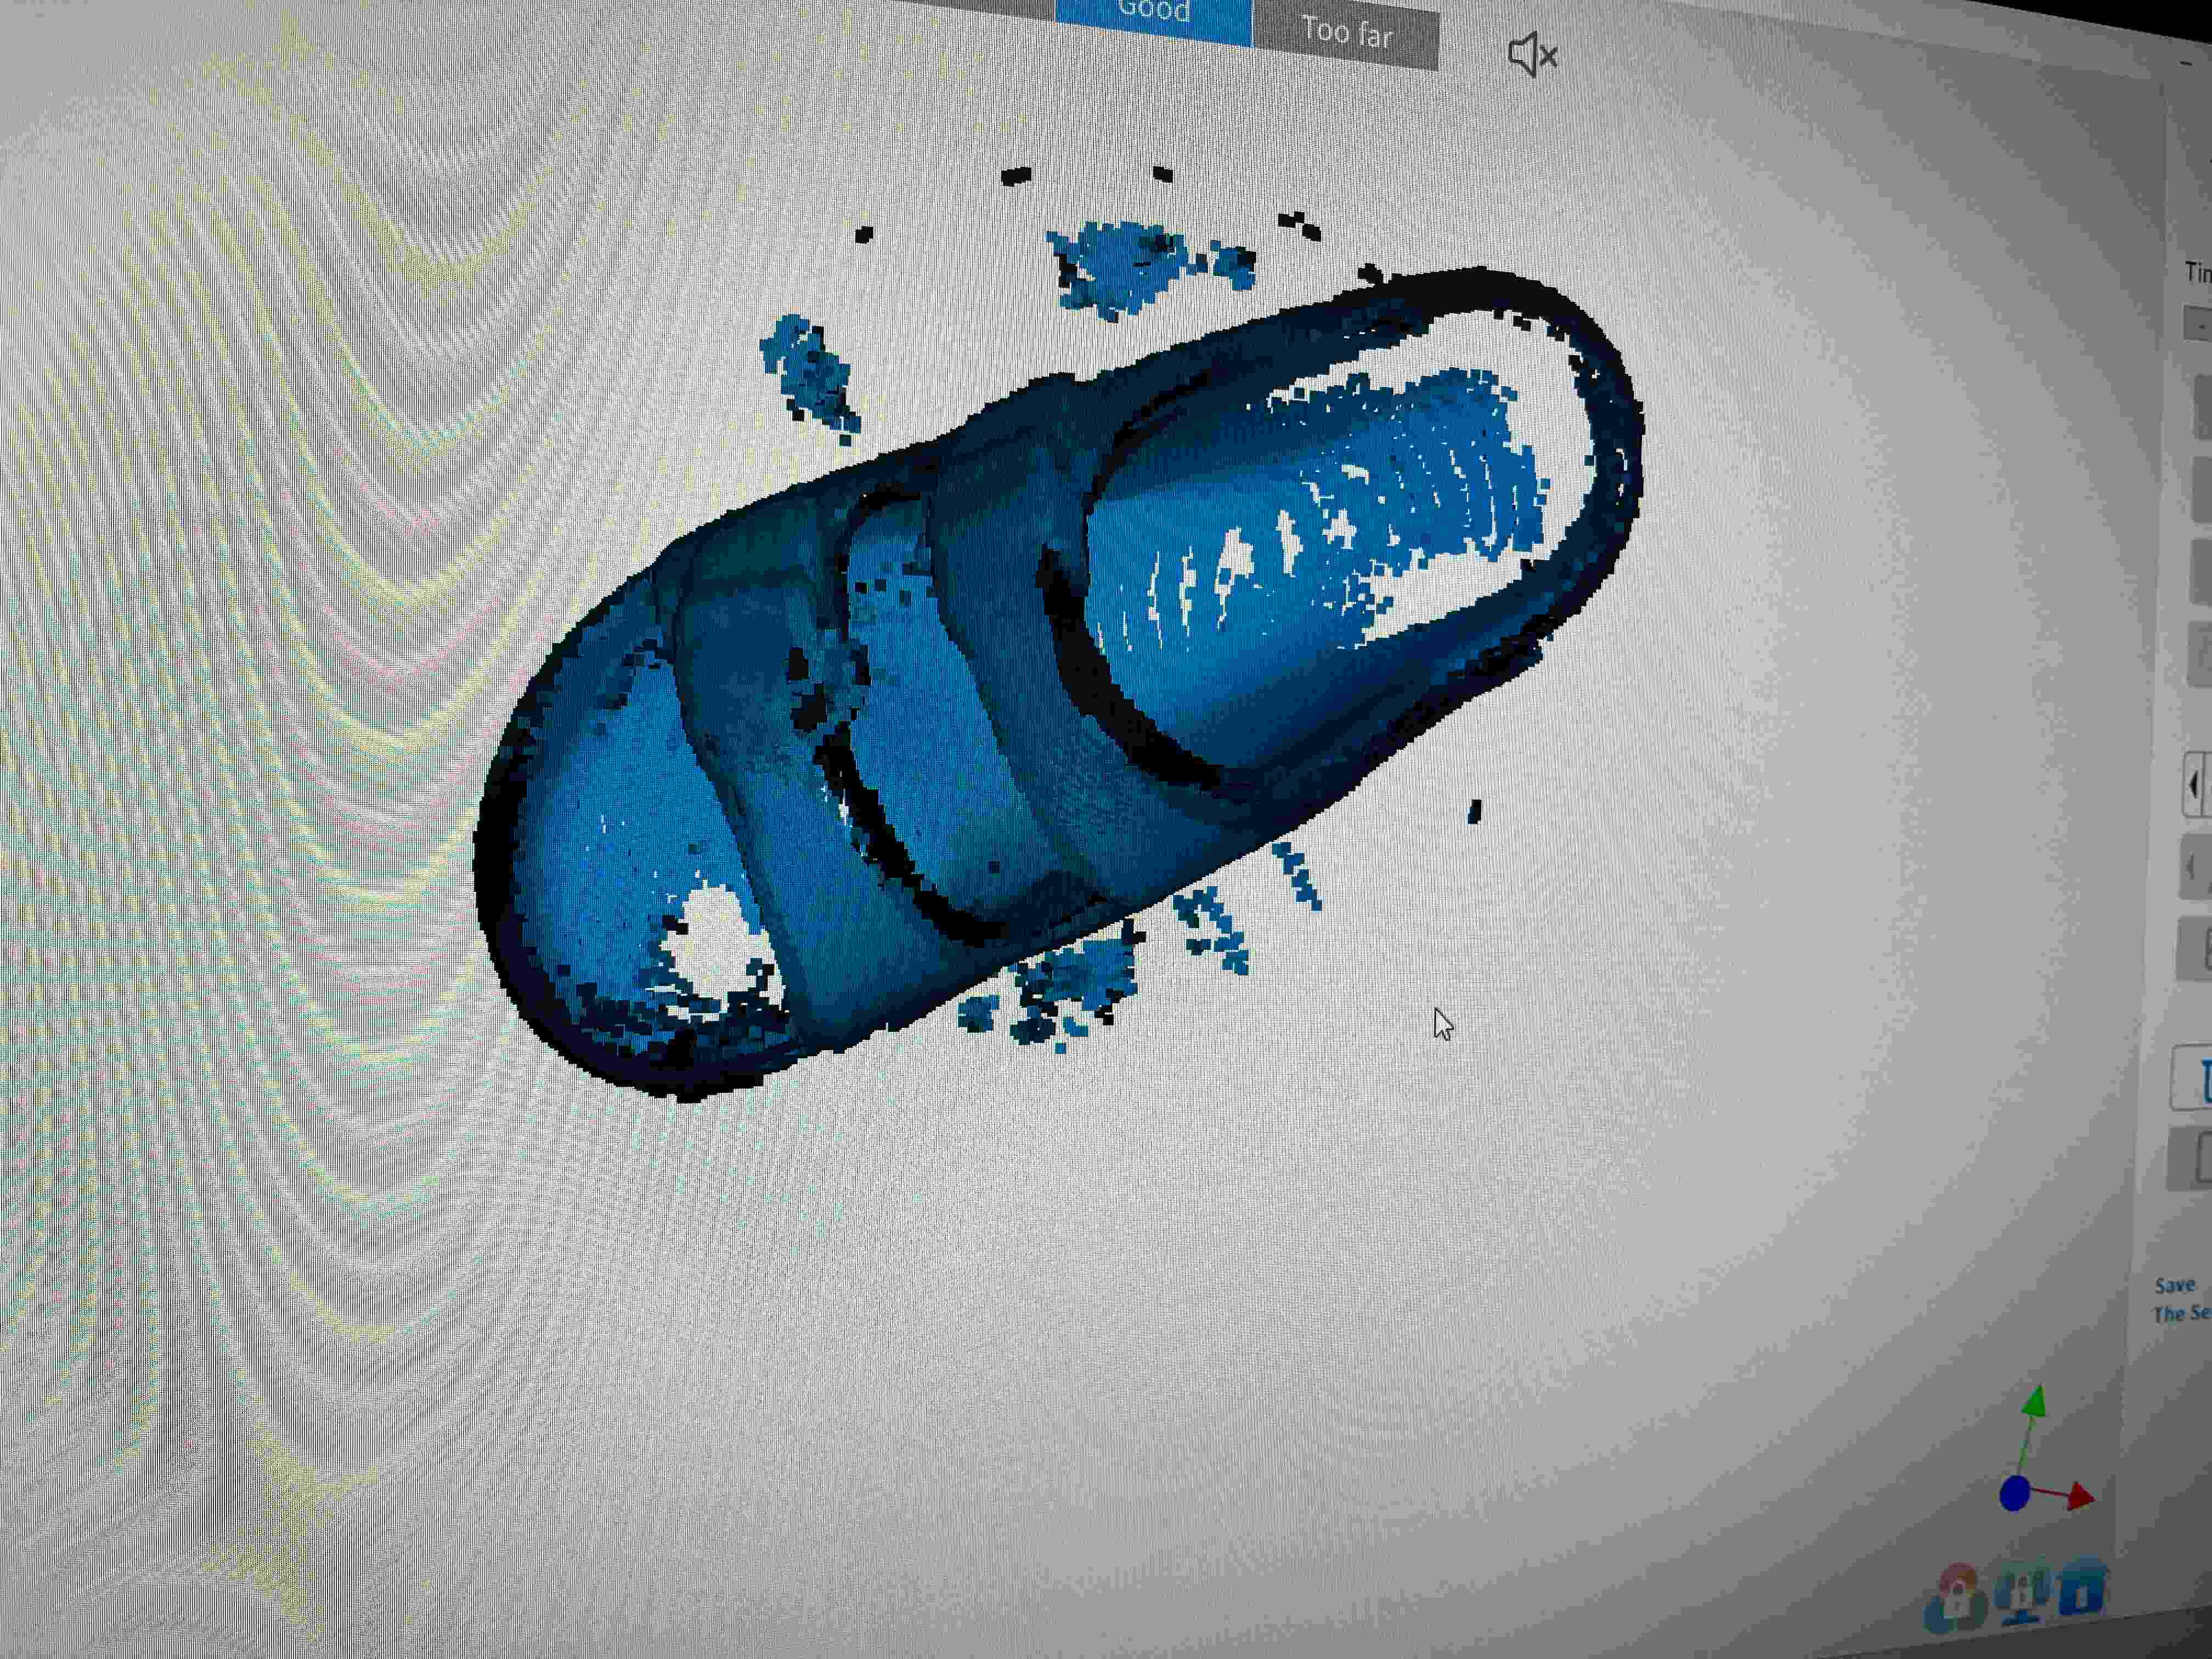 Point cloud of the shoe